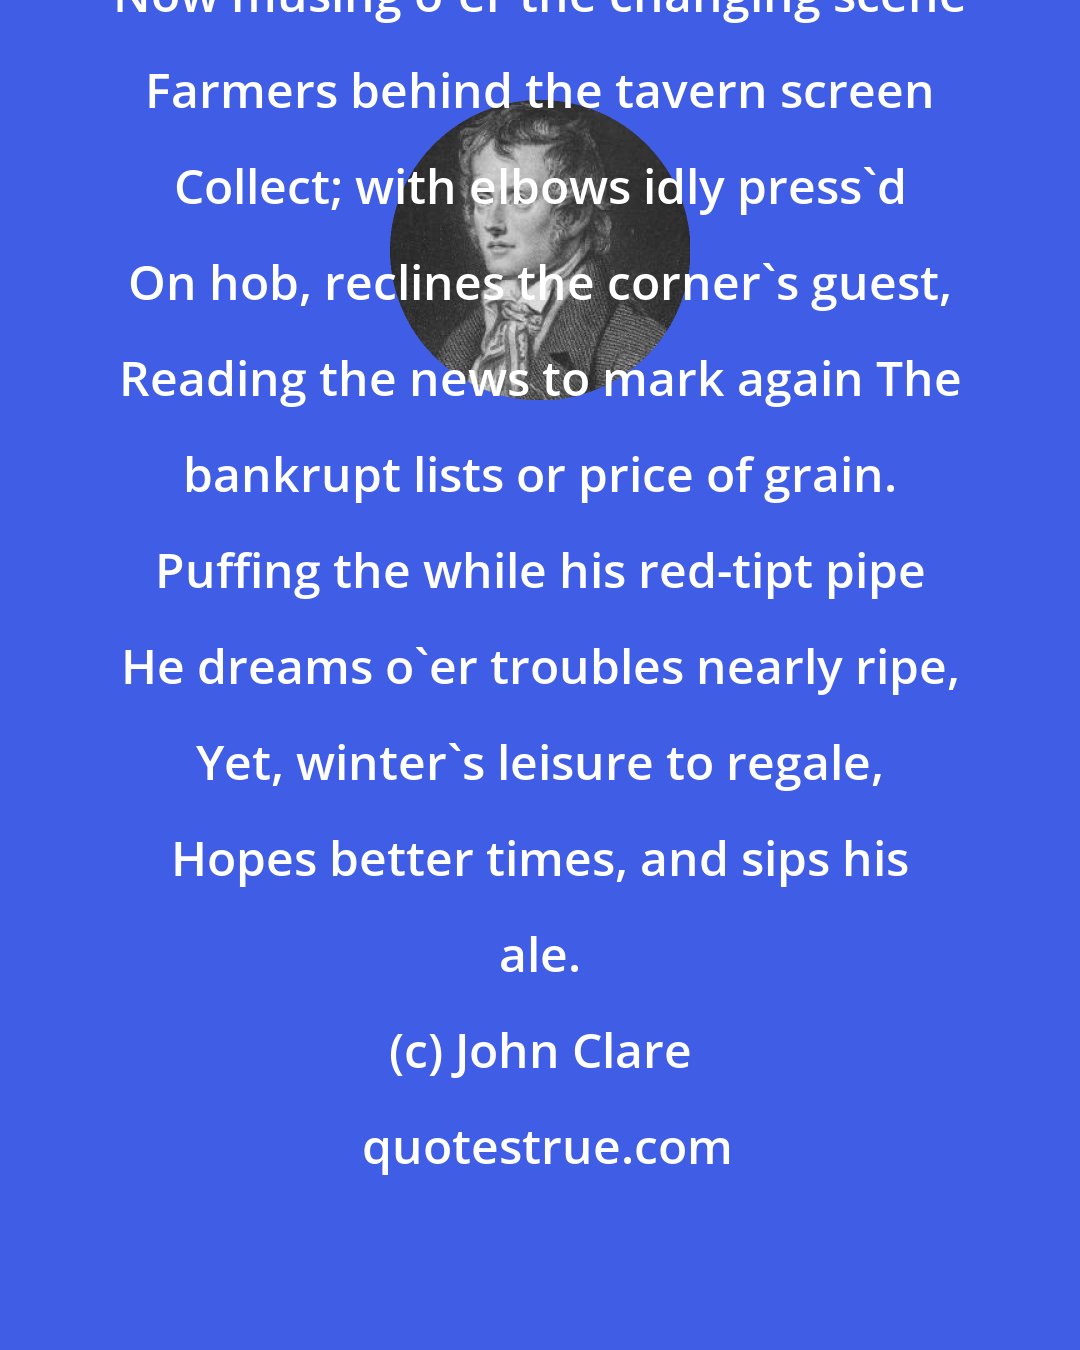 John Clare: Now musing o'er the changing scene Farmers behind the tavern screen Collect; with elbows idly press'd On hob, reclines the corner's guest, Reading the news to mark again The bankrupt lists or price of grain. Puffing the while his red-tipt pipe He dreams o'er troubles nearly ripe, Yet, winter's leisure to regale, Hopes better times, and sips his ale.